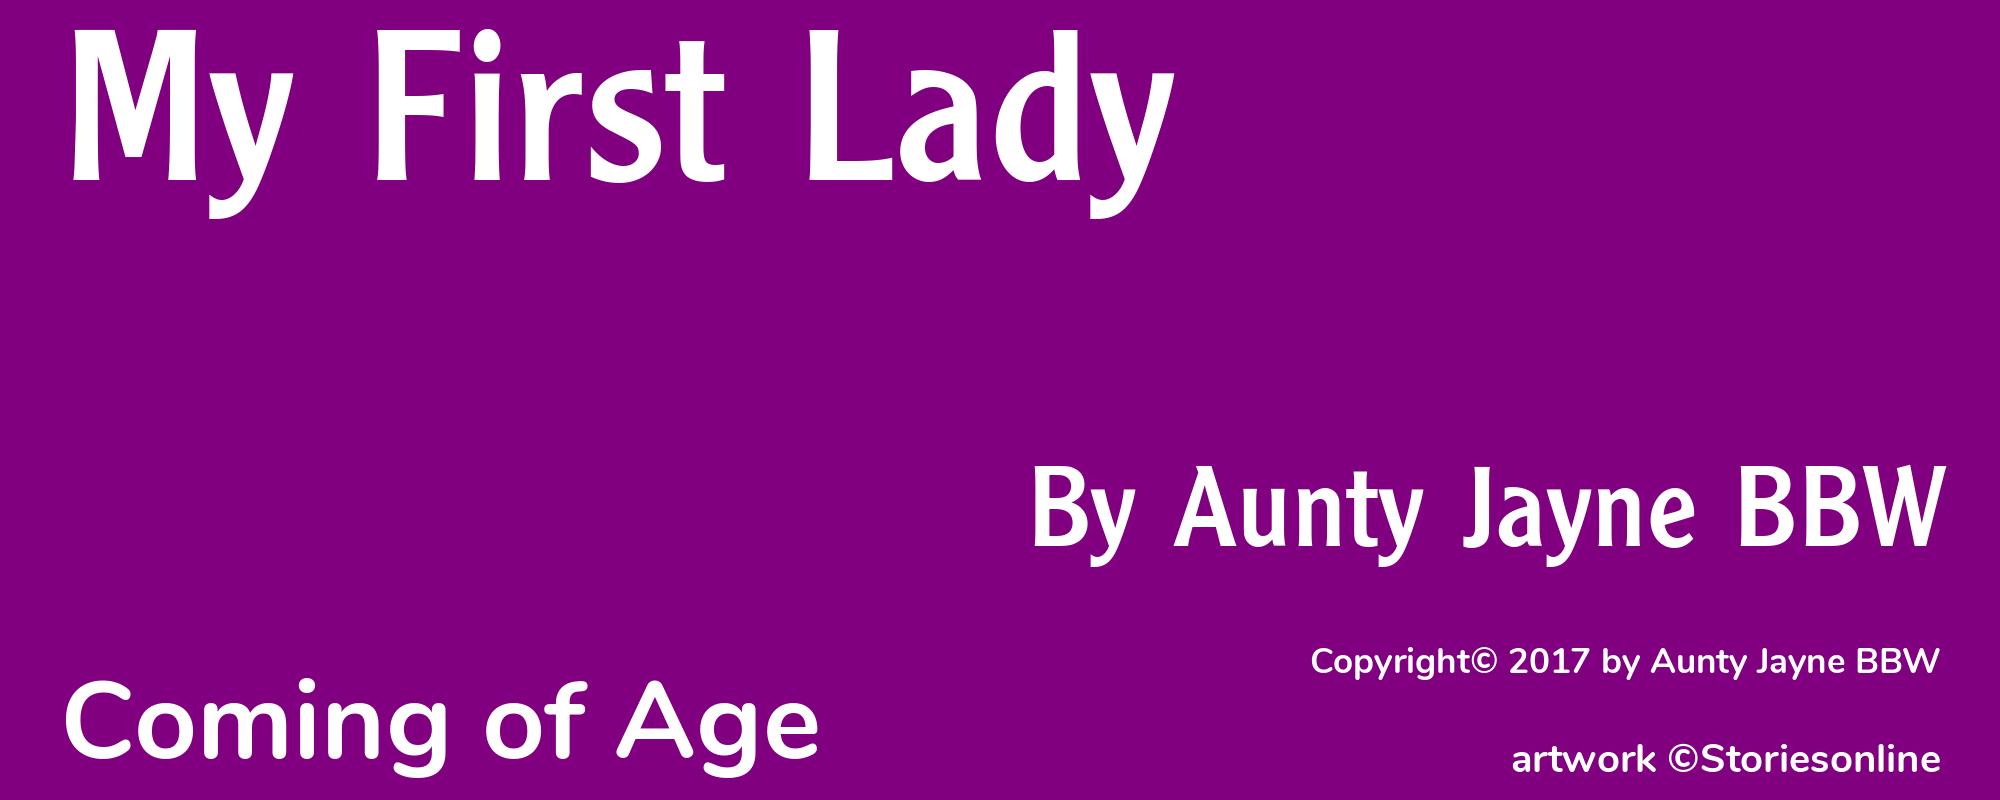 My First Lady - Cover